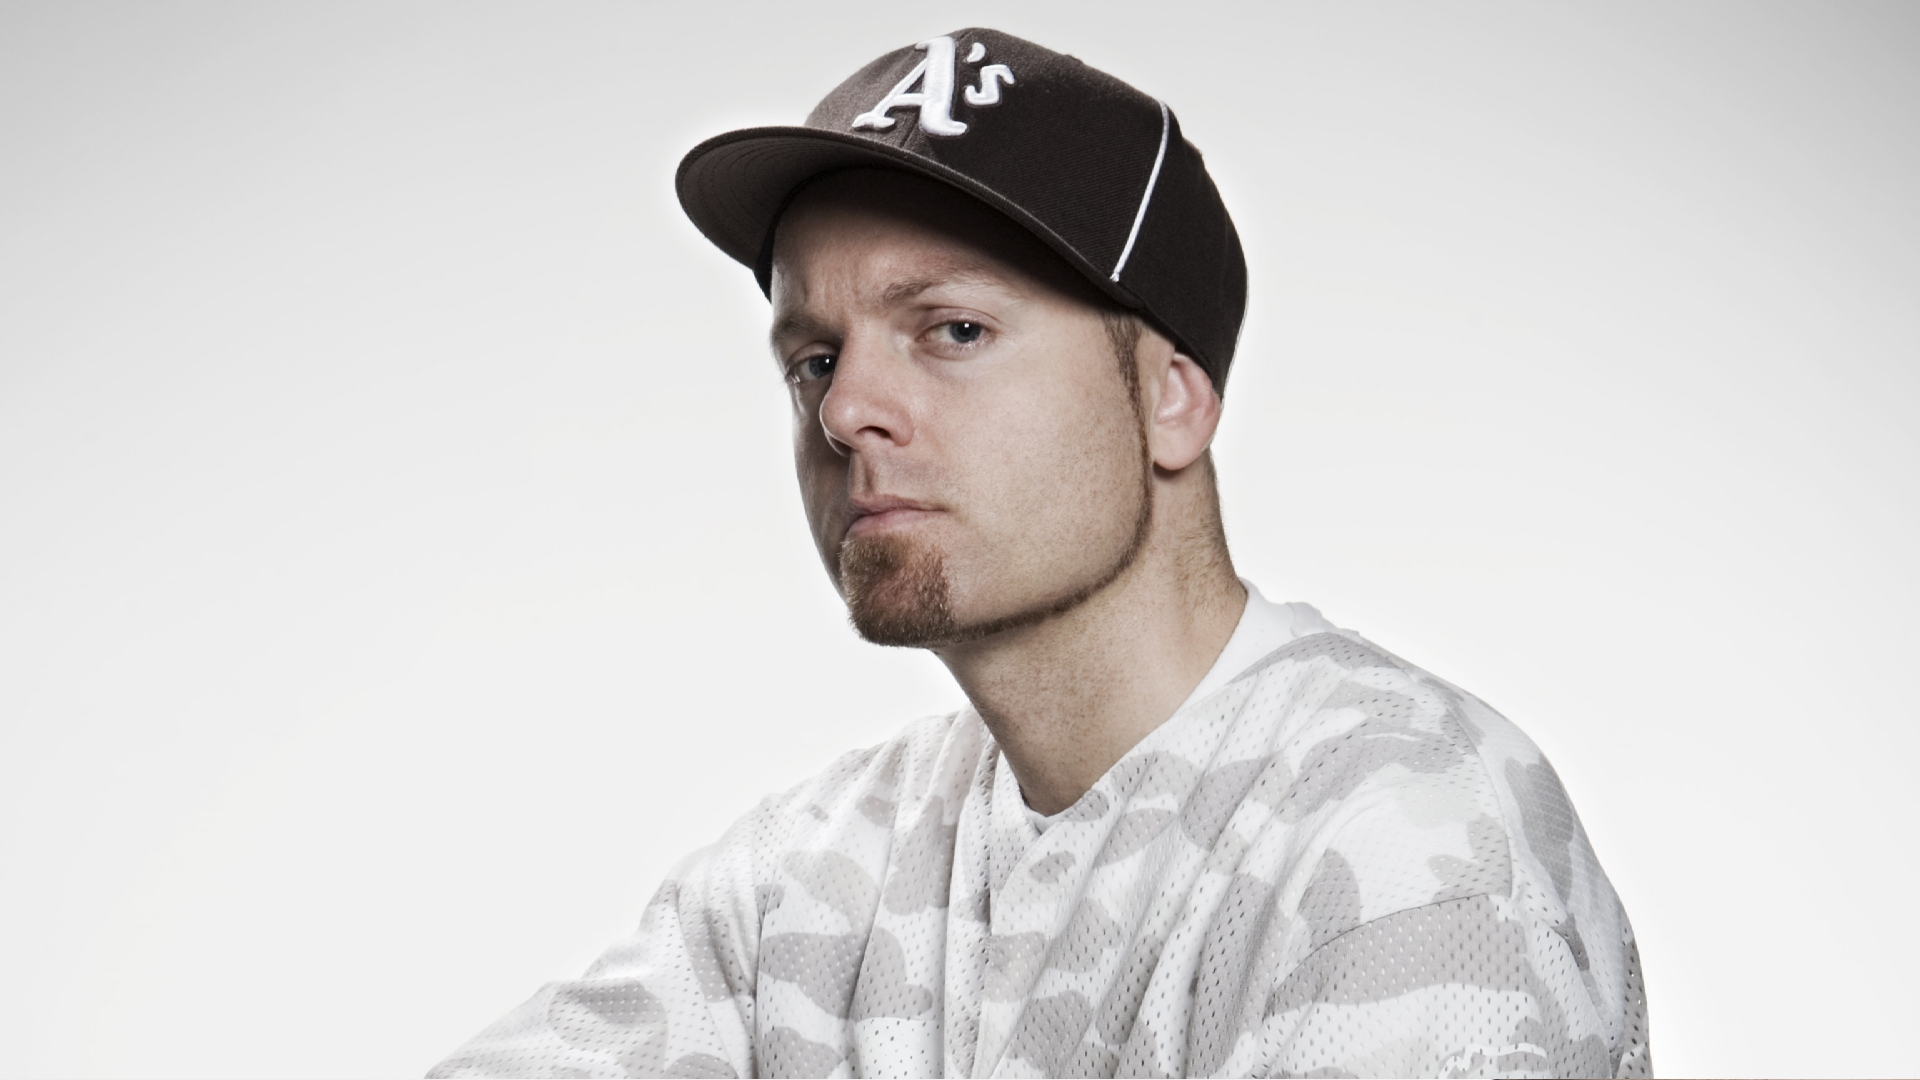 1 Dj Shadow HD Wallpapers | Backgrounds - Wallpaper Abyss